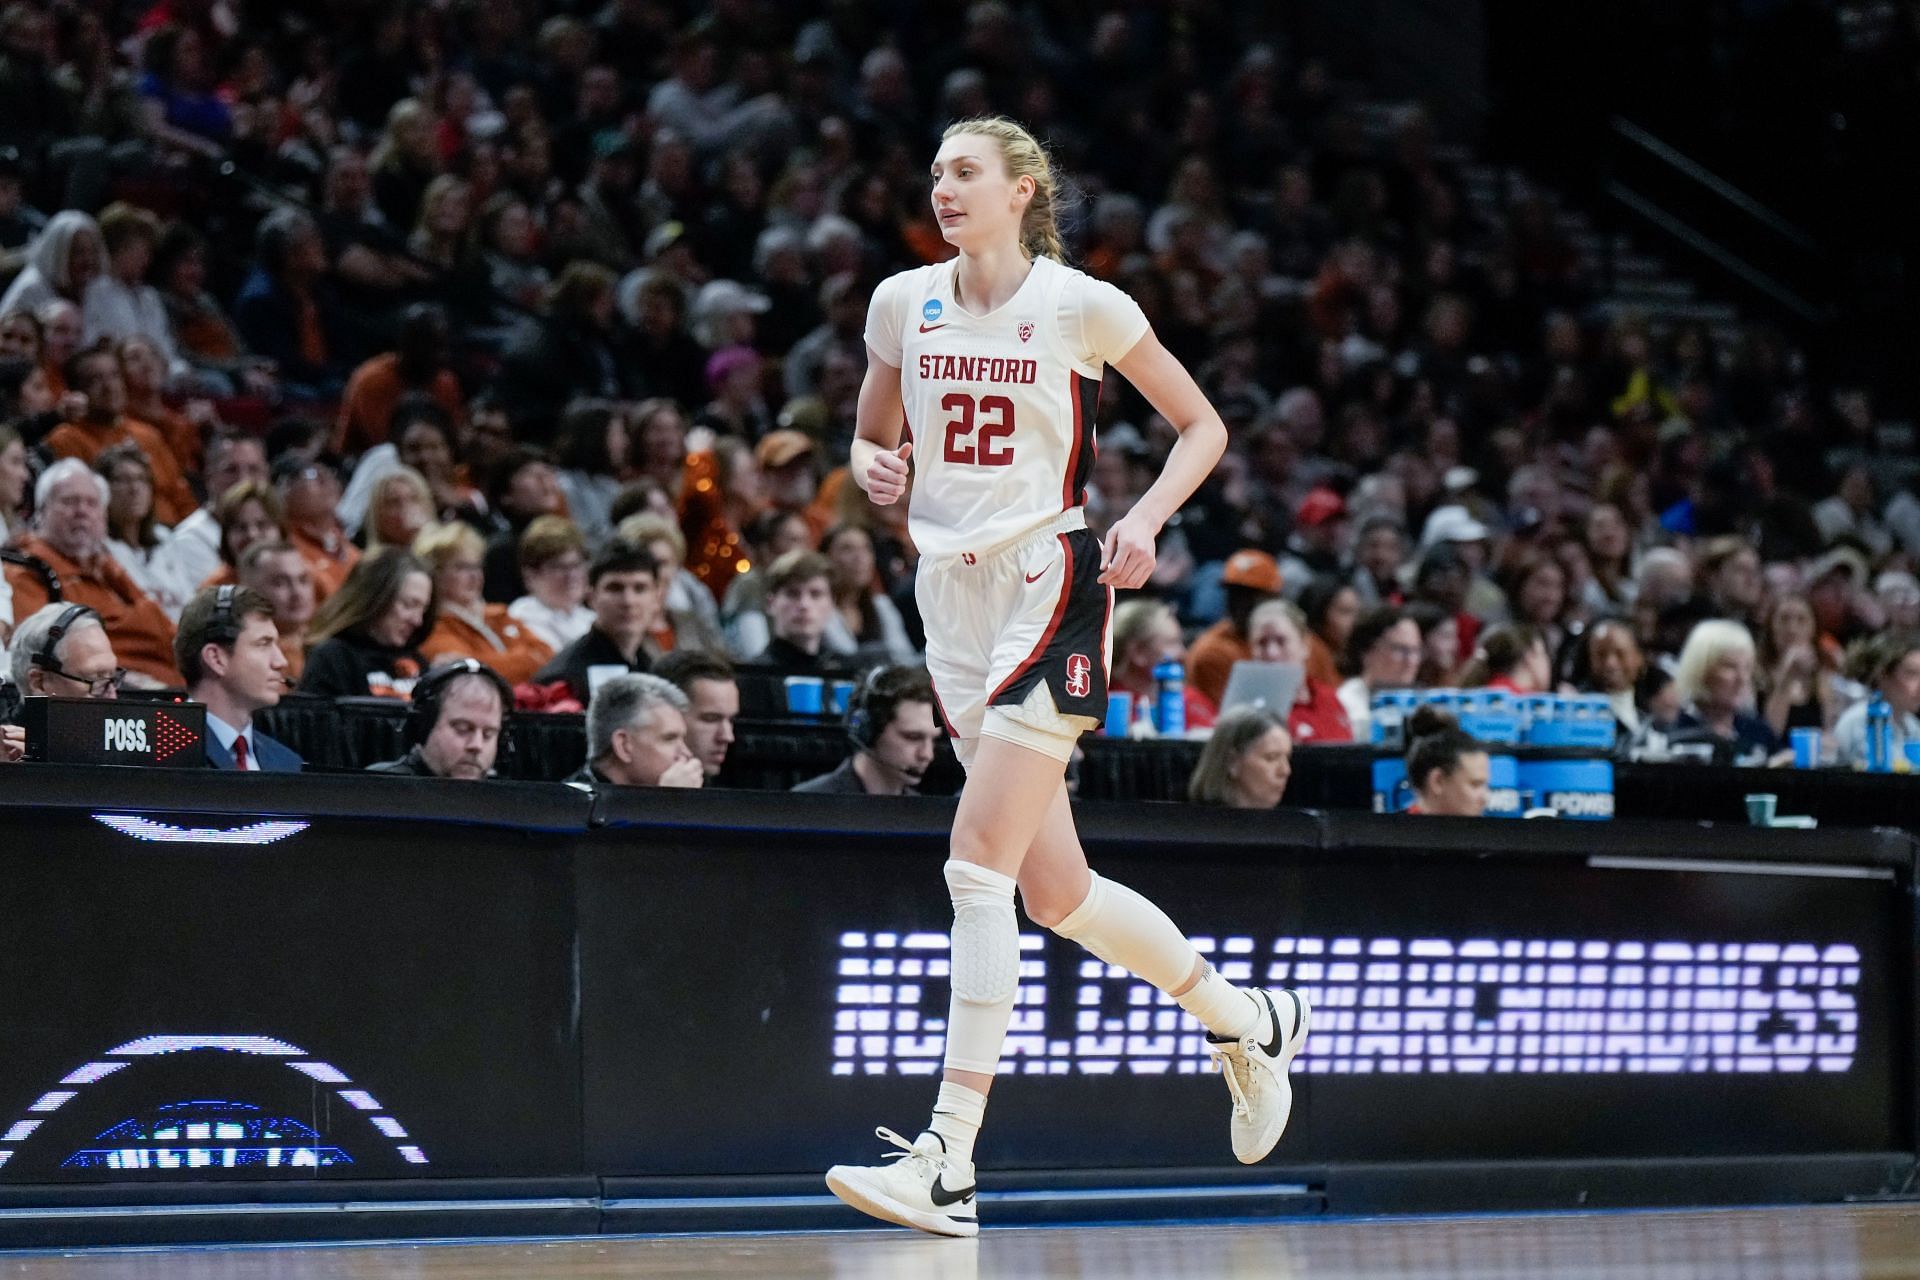 Stanford post player Cameron Brink is the best propsect in the WNBA Draft other than Caitlin Clark. How could she jump Clark in the Draft?